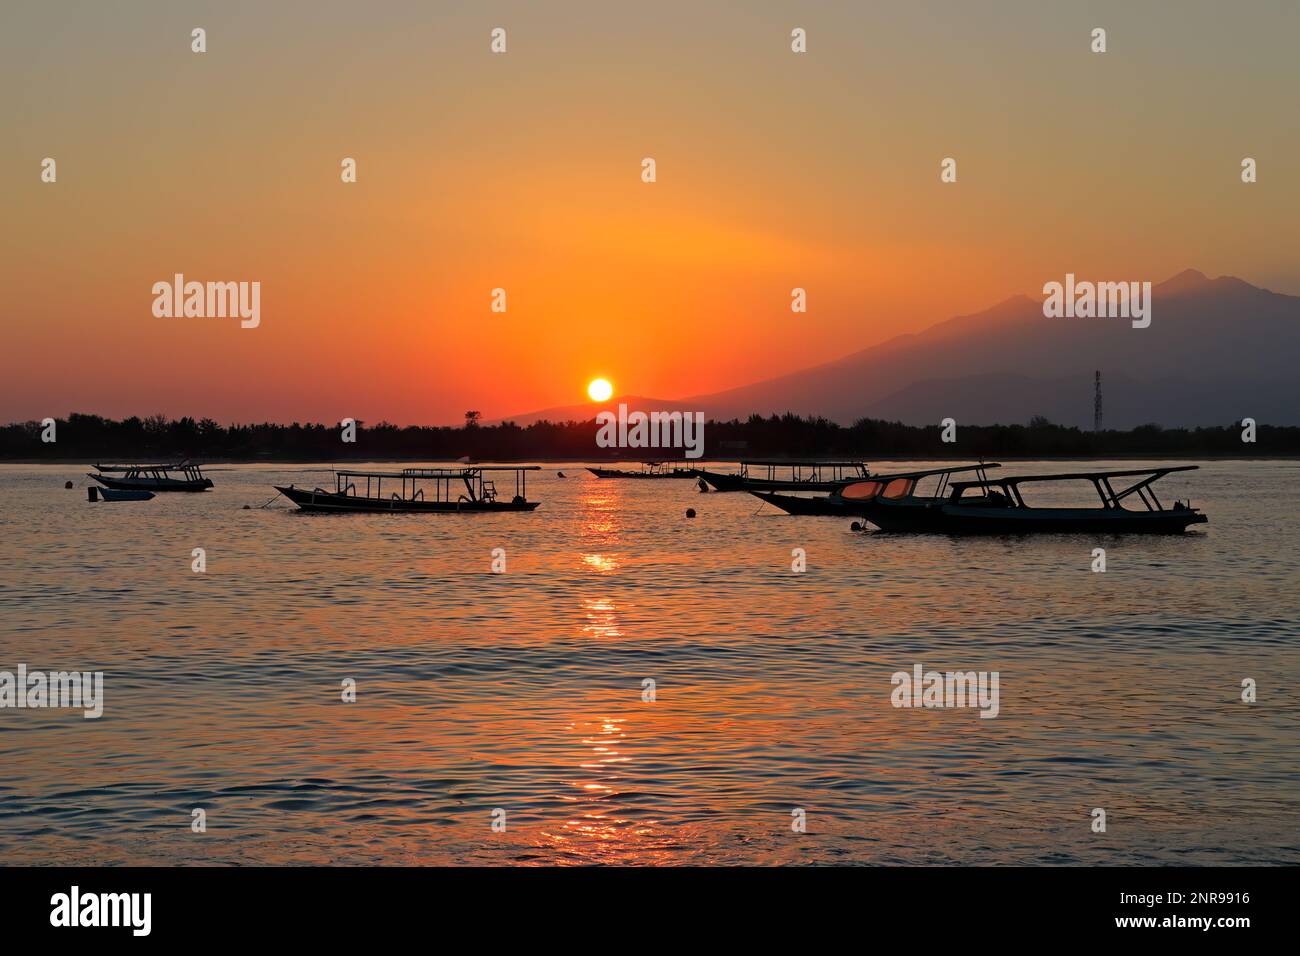 Scenic beach with boats silhouetted at sunset on a tropical island of Indonesia Stock Photo